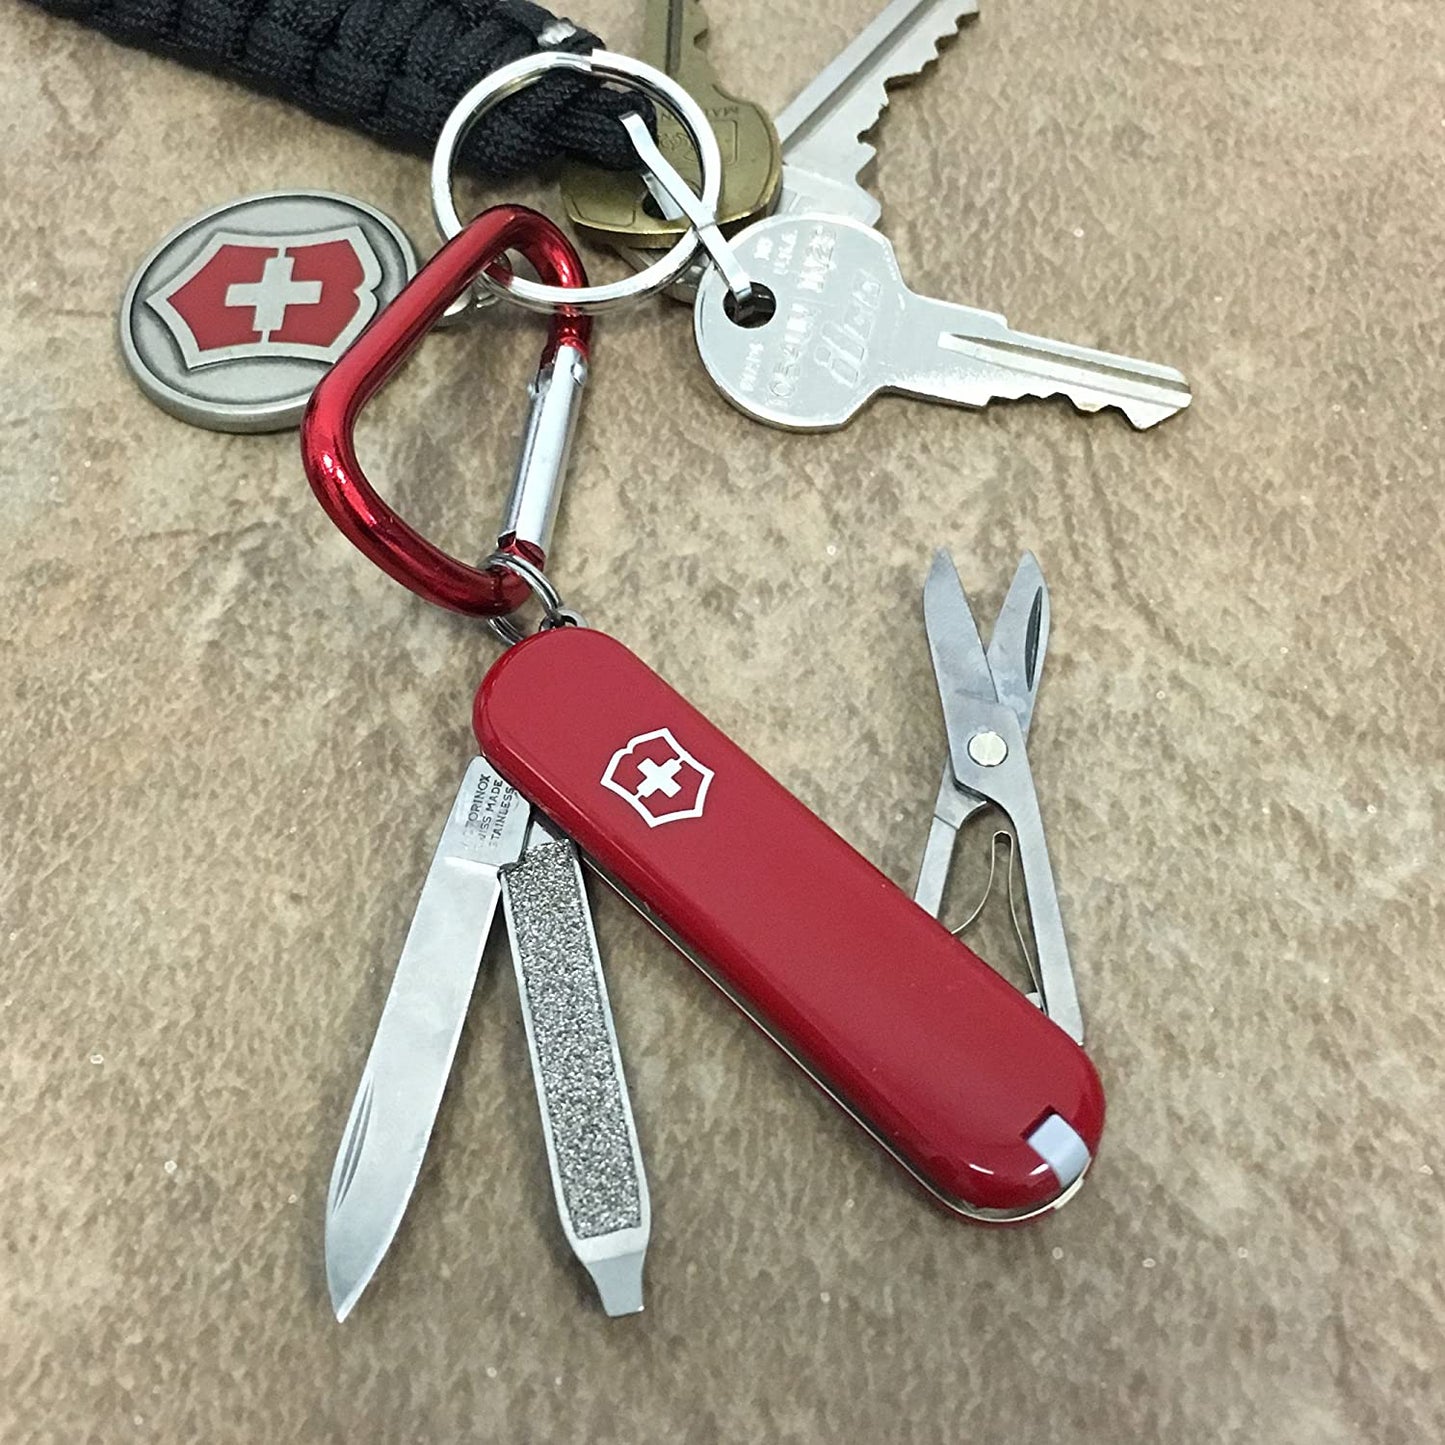 Classic Compact 7 Function Swiss Army Knife